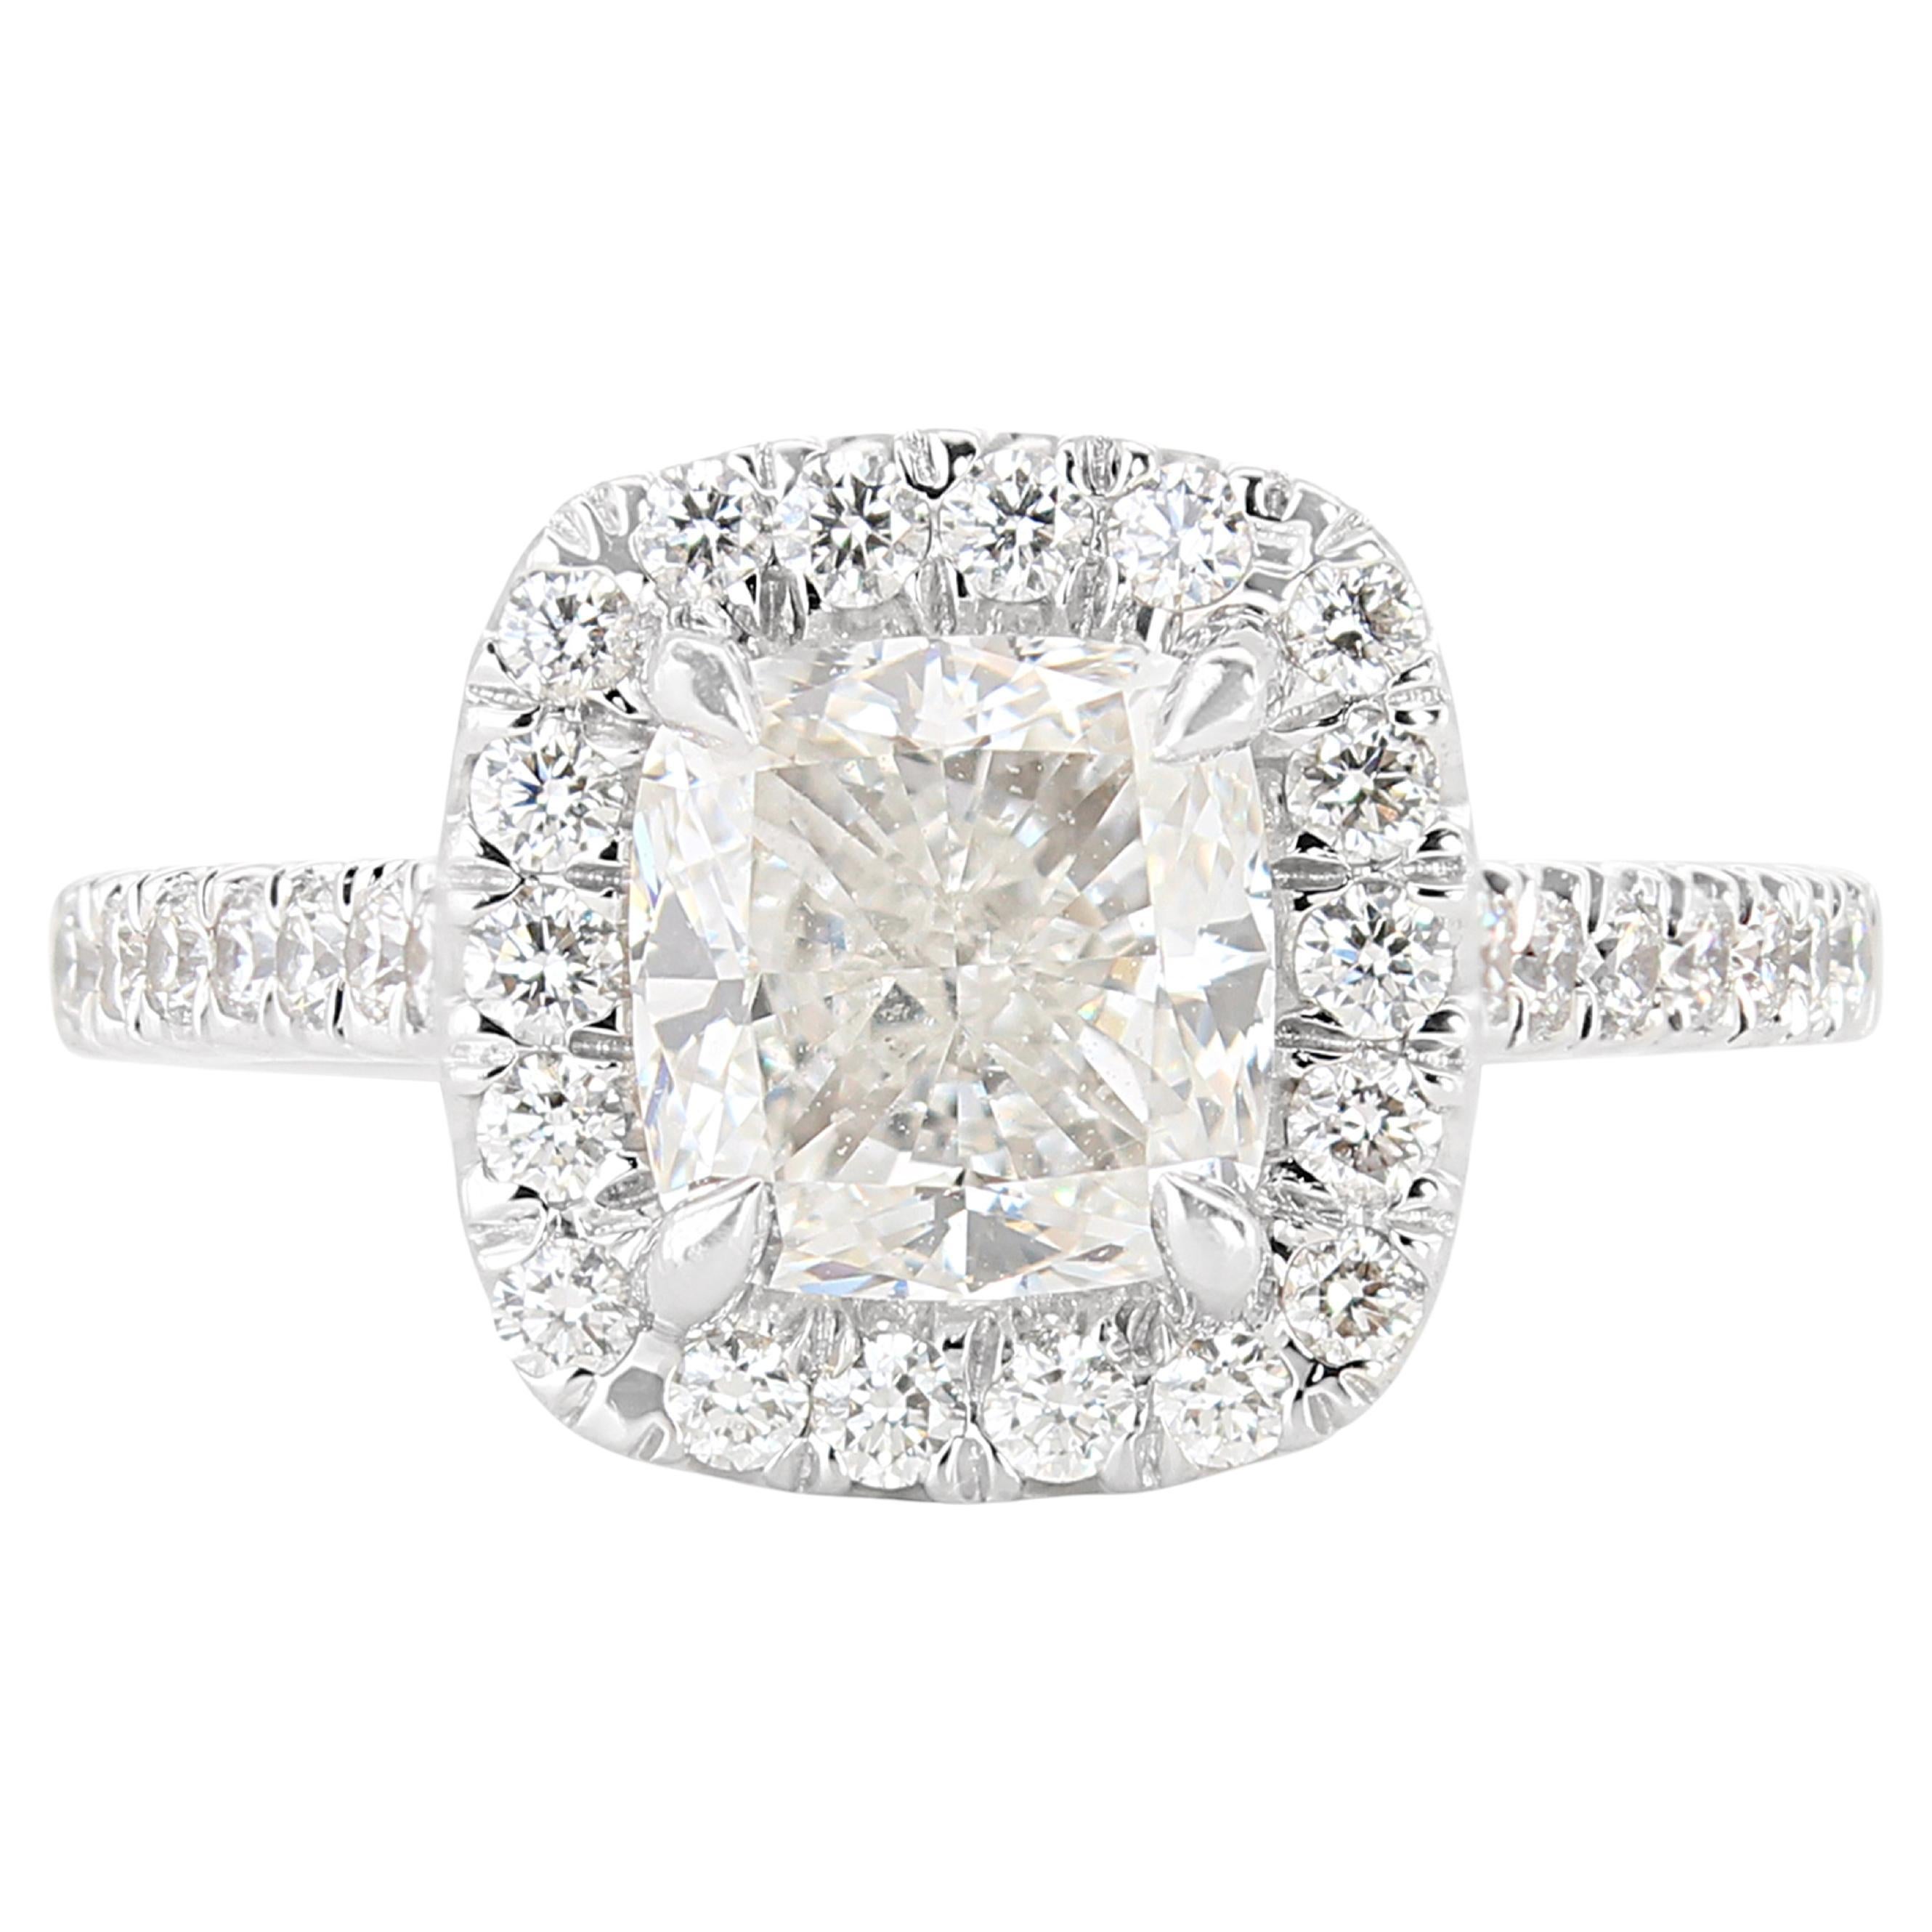 Dazzling 1.30ct Diamond Halo Ring with Side Diamonds in 18k White Gold For Sale